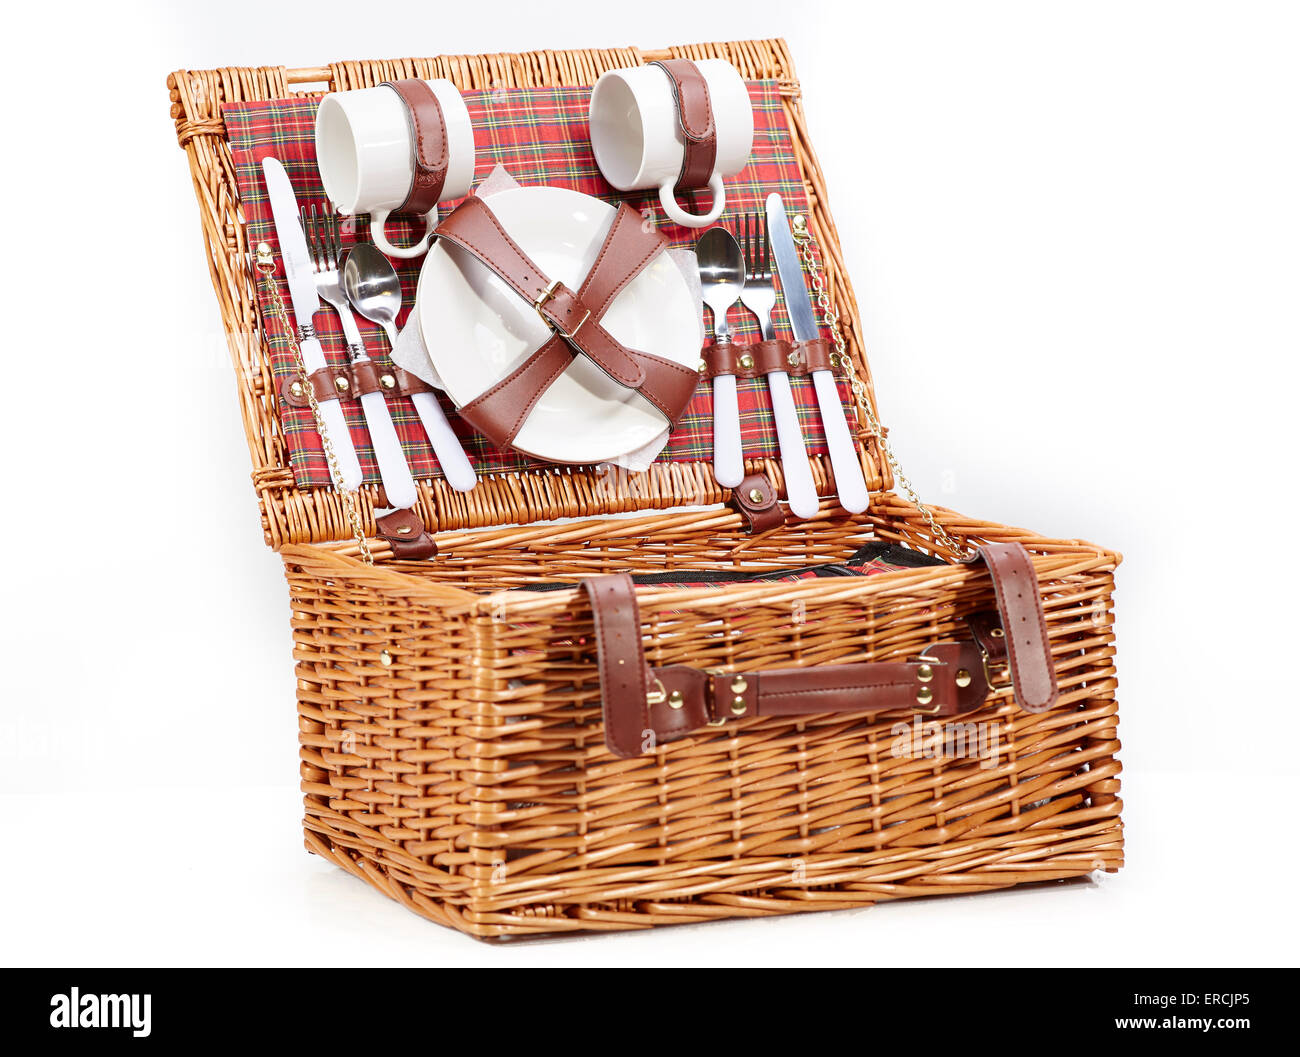 4 Person W and S Wickers and Straw Luxury Picnic Basket Hamper 